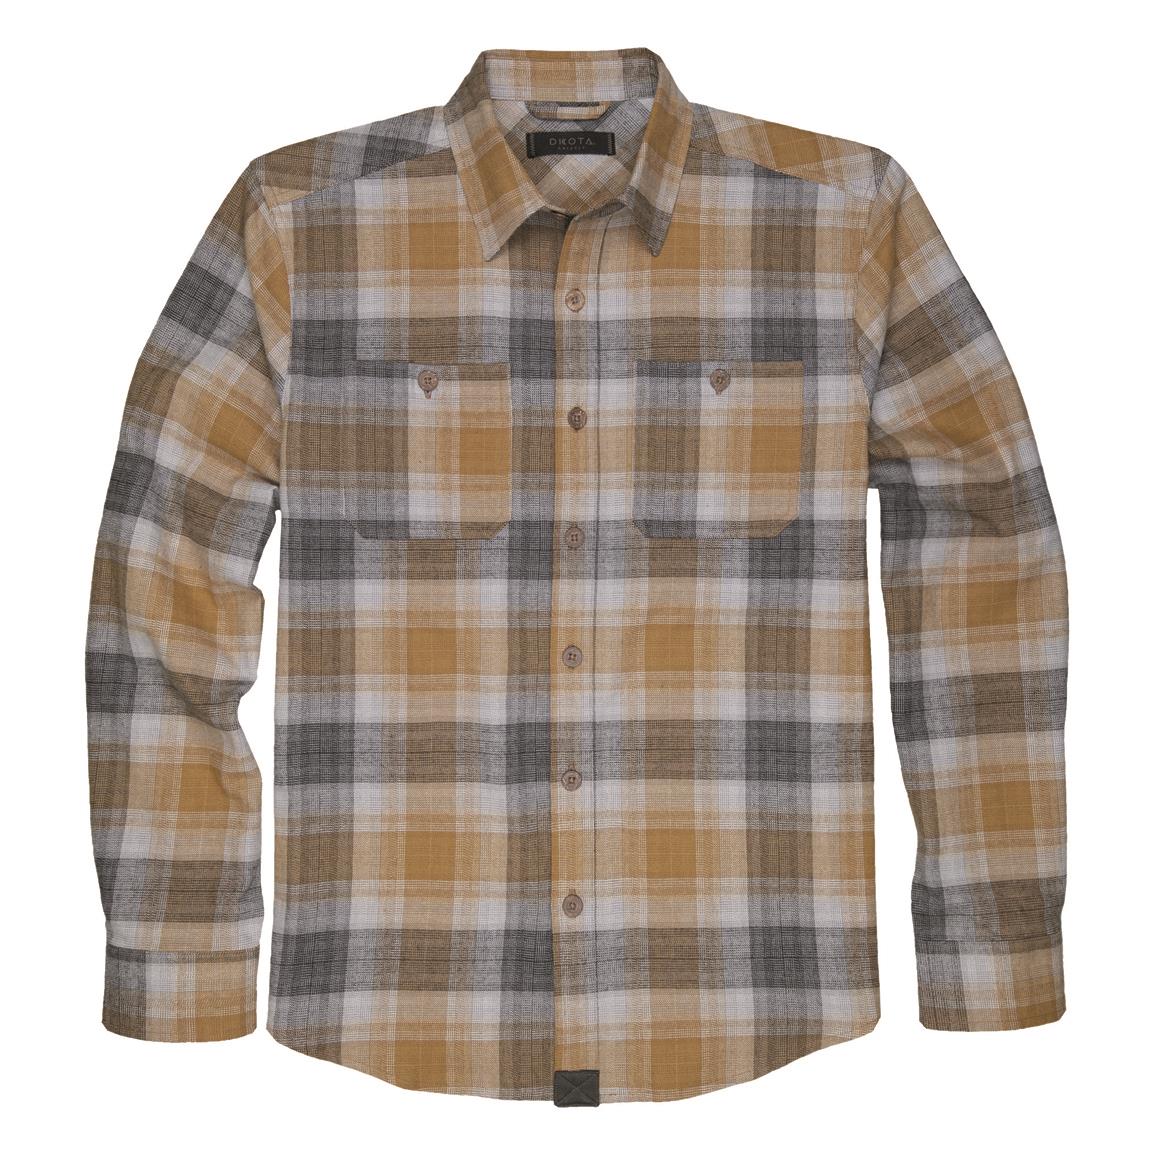 DKOTA GRIZZLY Men's Grant Flannel Shirt, Nugget